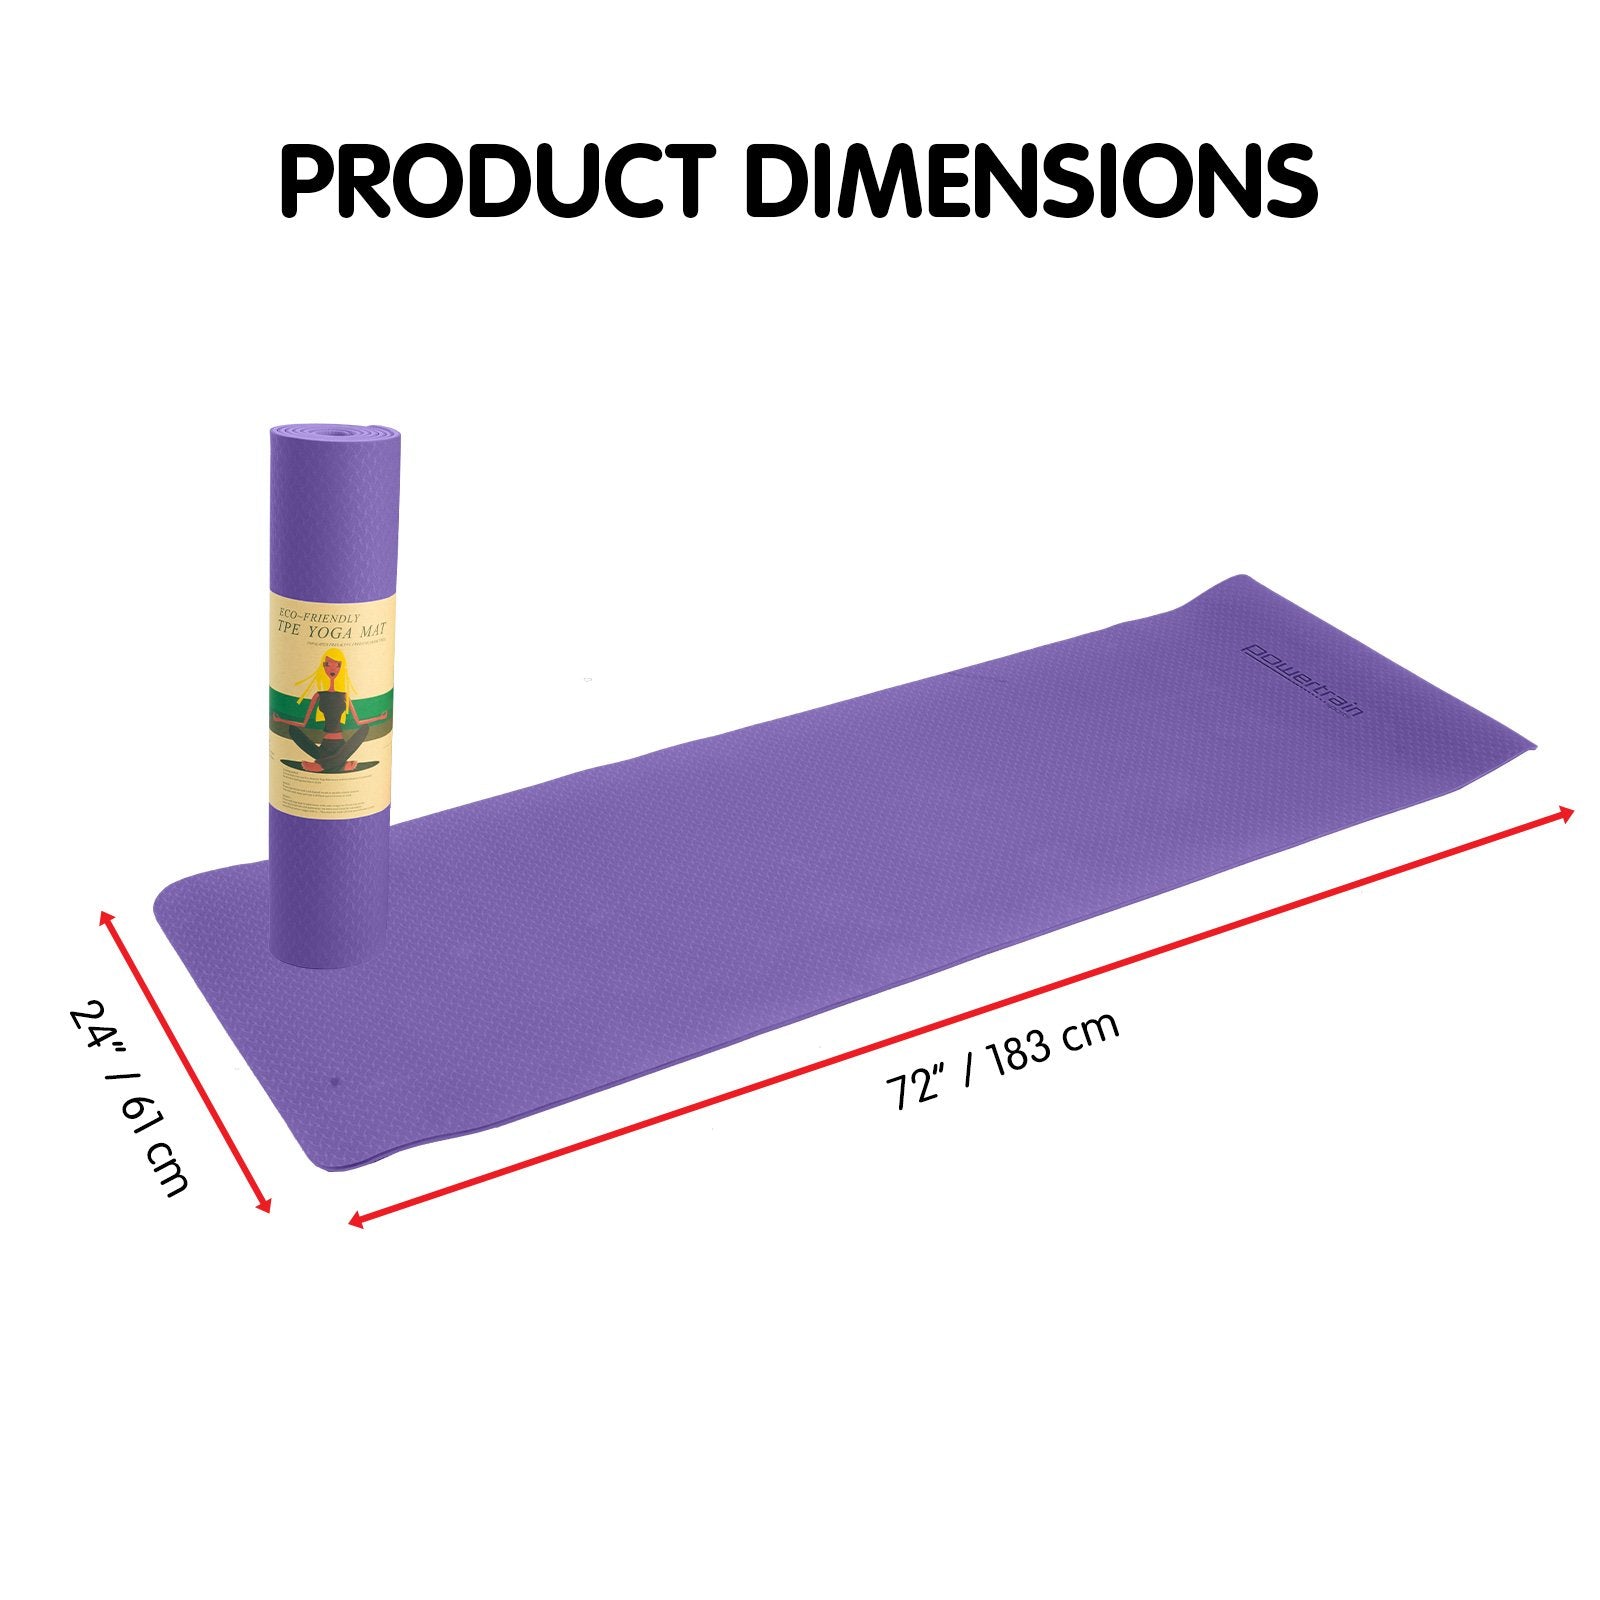 Eco-friendly Dual Layer 6mm Yoga Mat | Dark Lavender | Non-slip Surface And Carry Strap For Ultimate Comfort And Portability